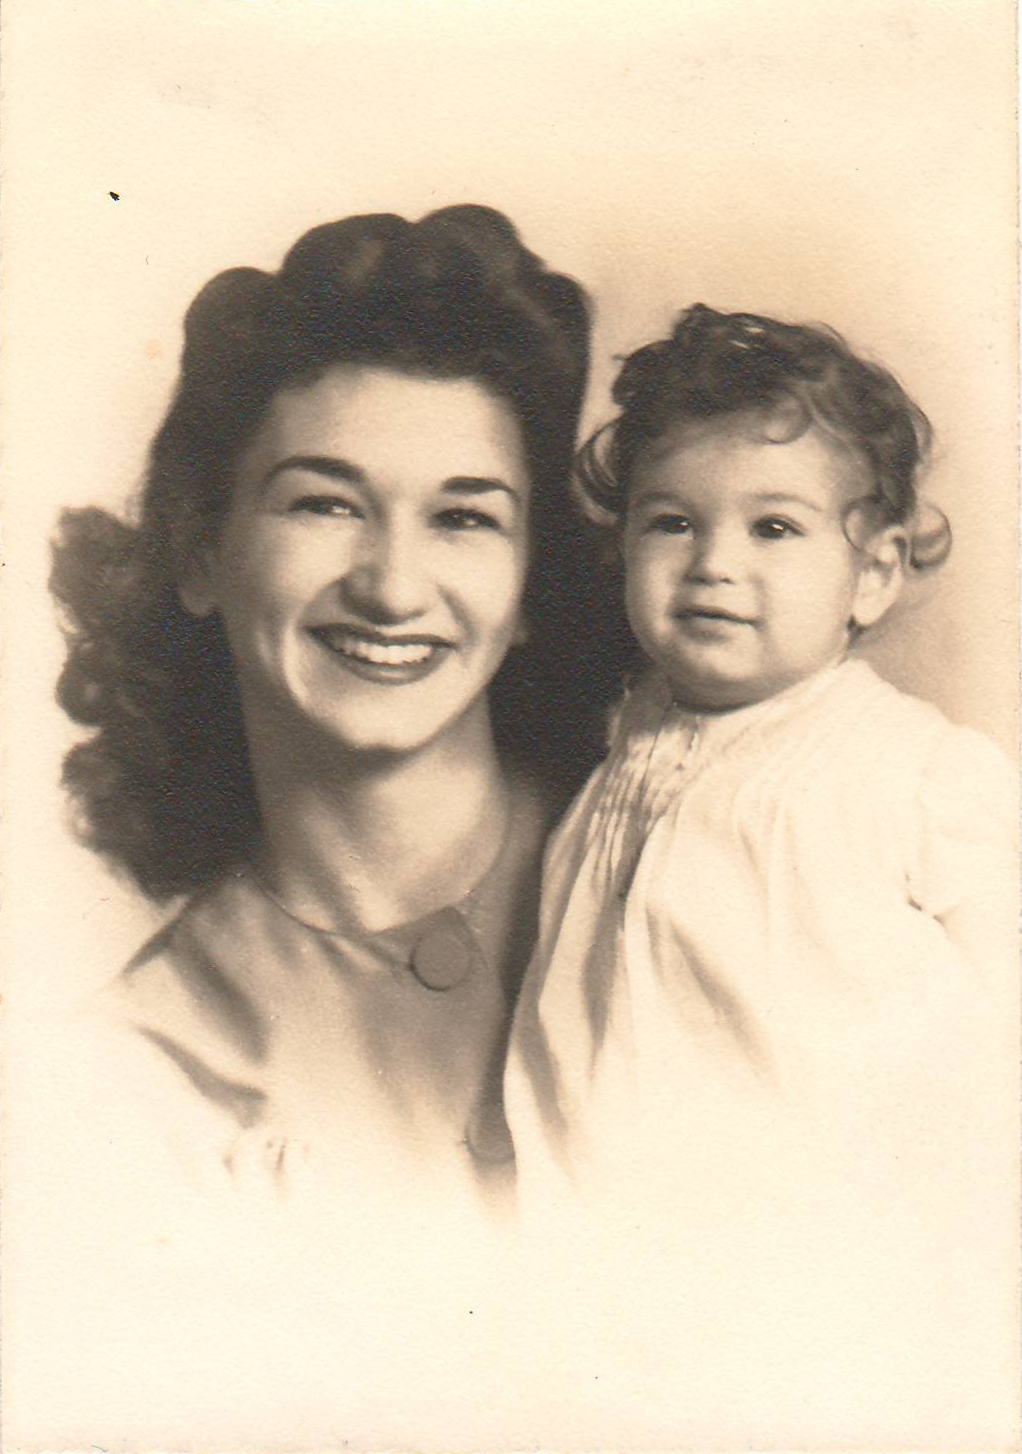 Becky and her daughter Donna, 1943.